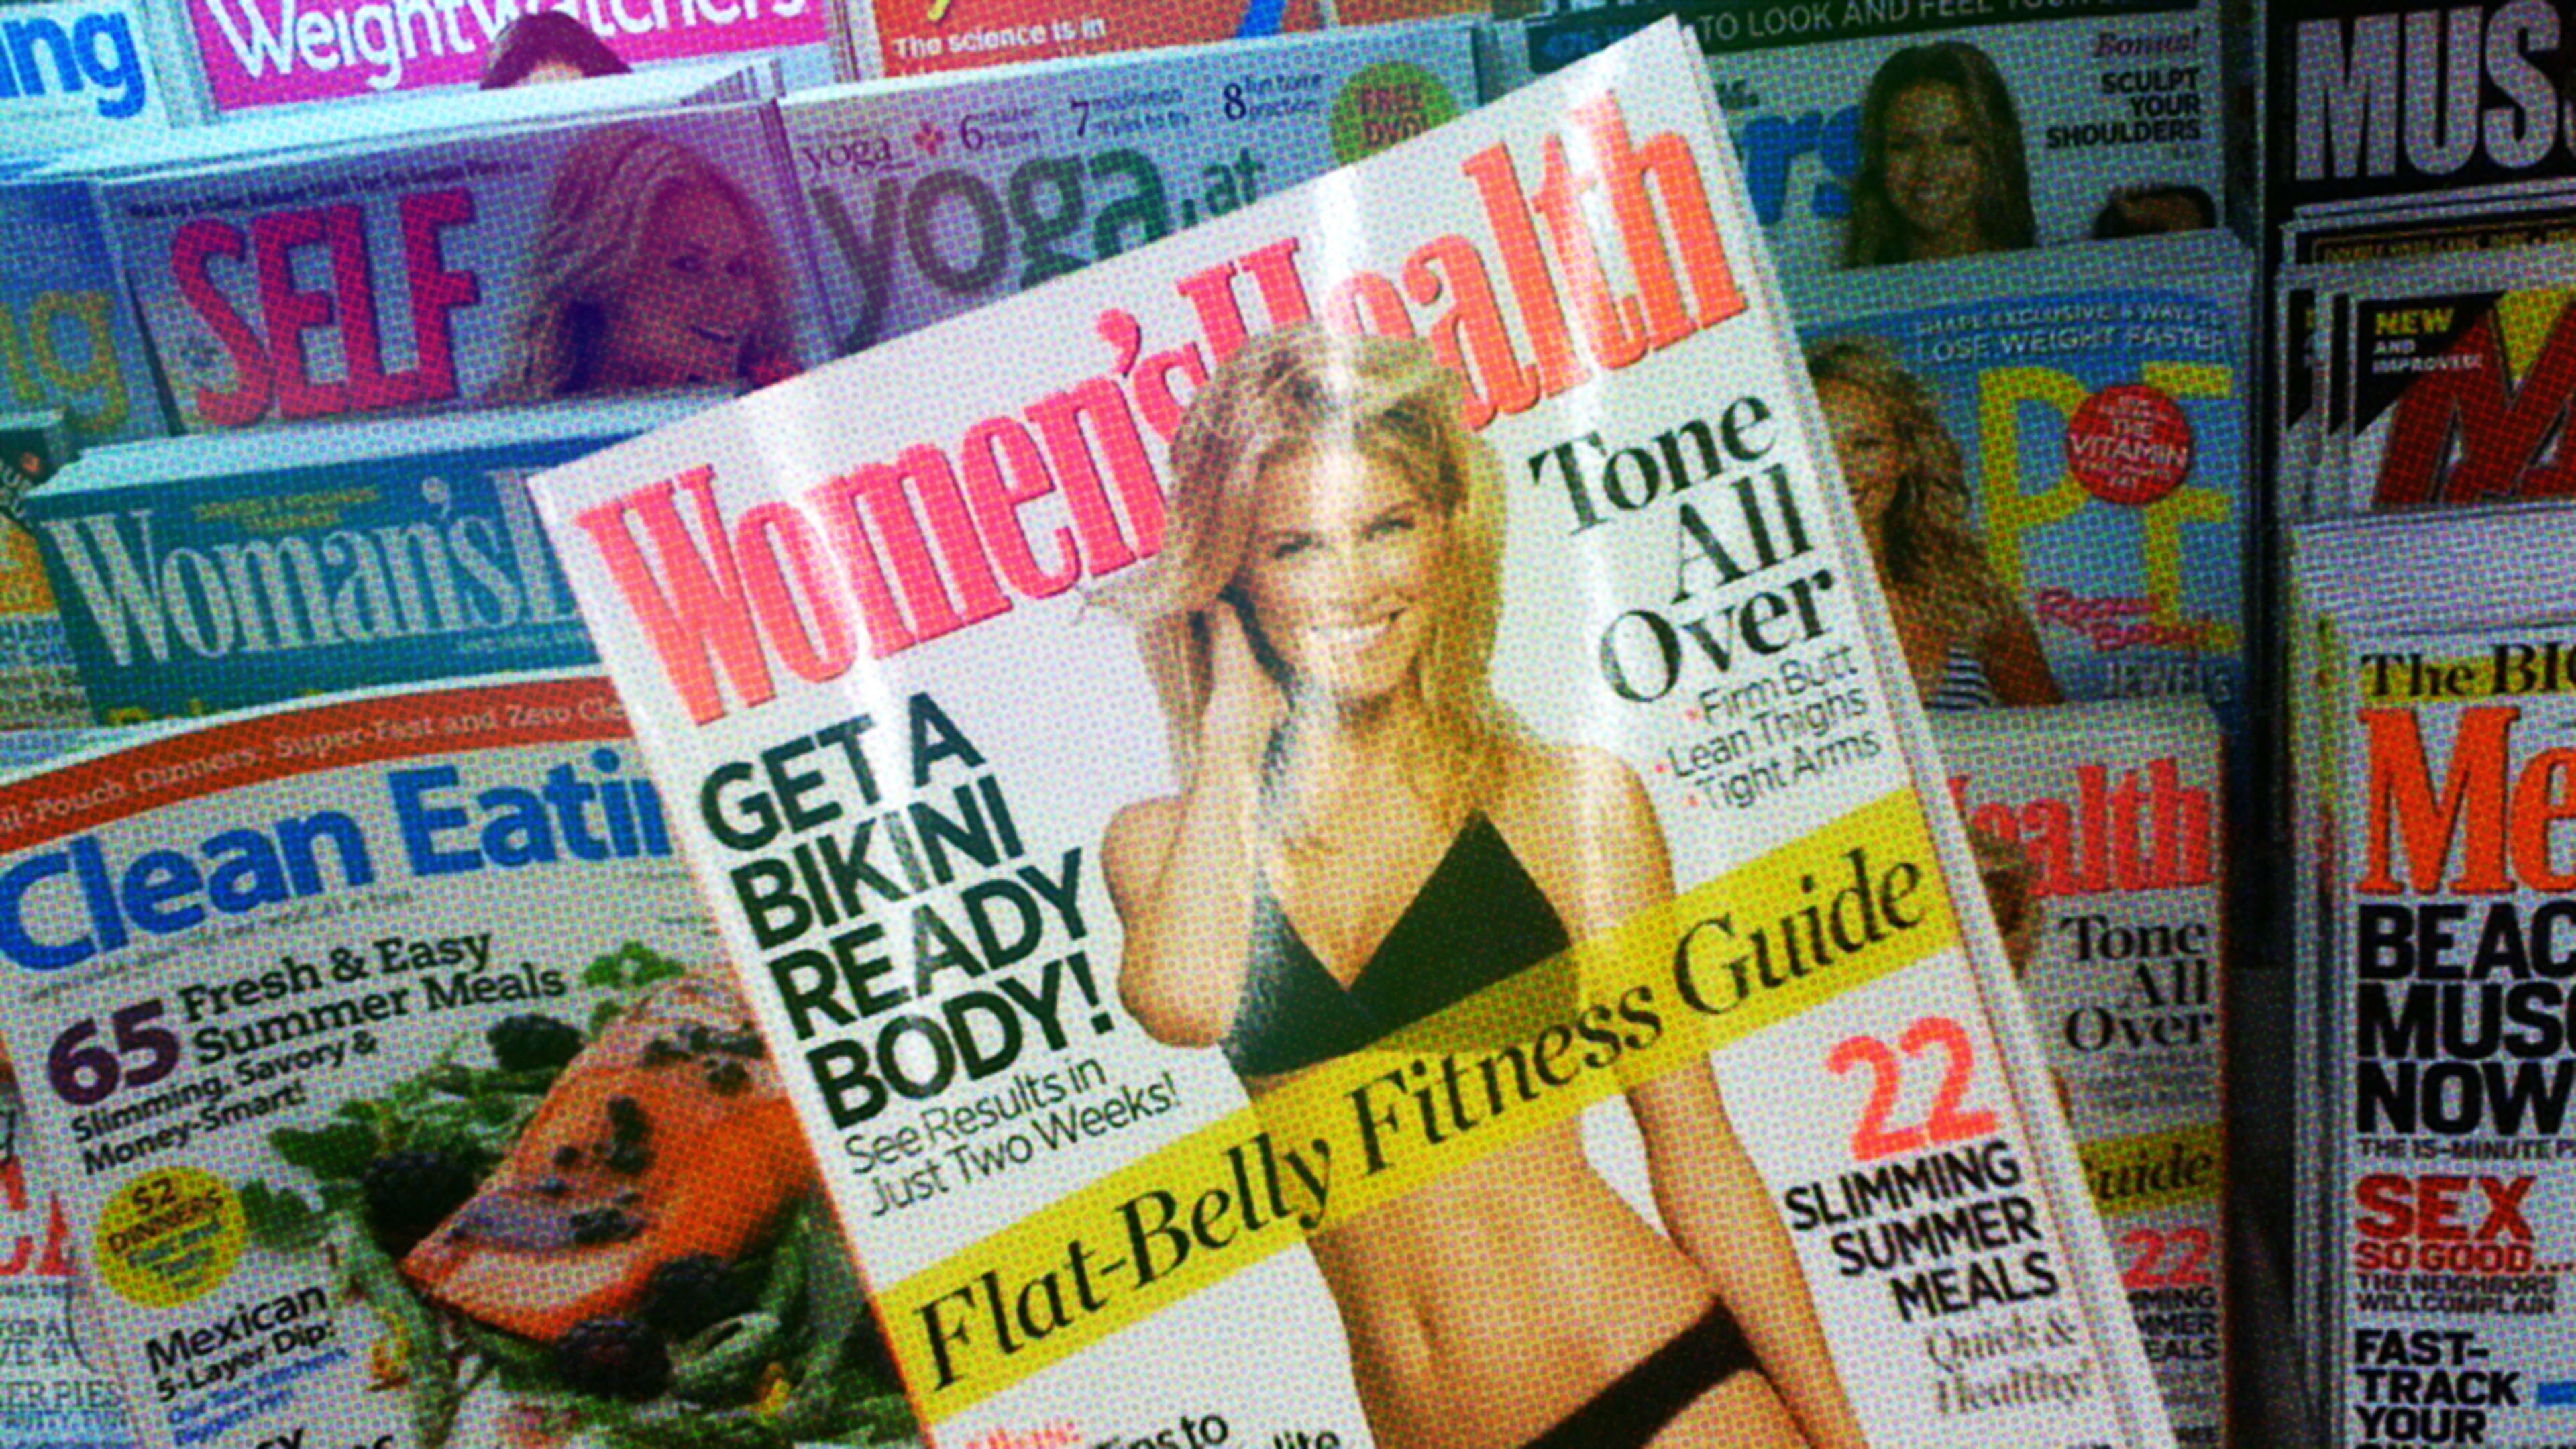 Hearst Is Laying Off Over A Dozen Staffers At Women’s Health Magazine